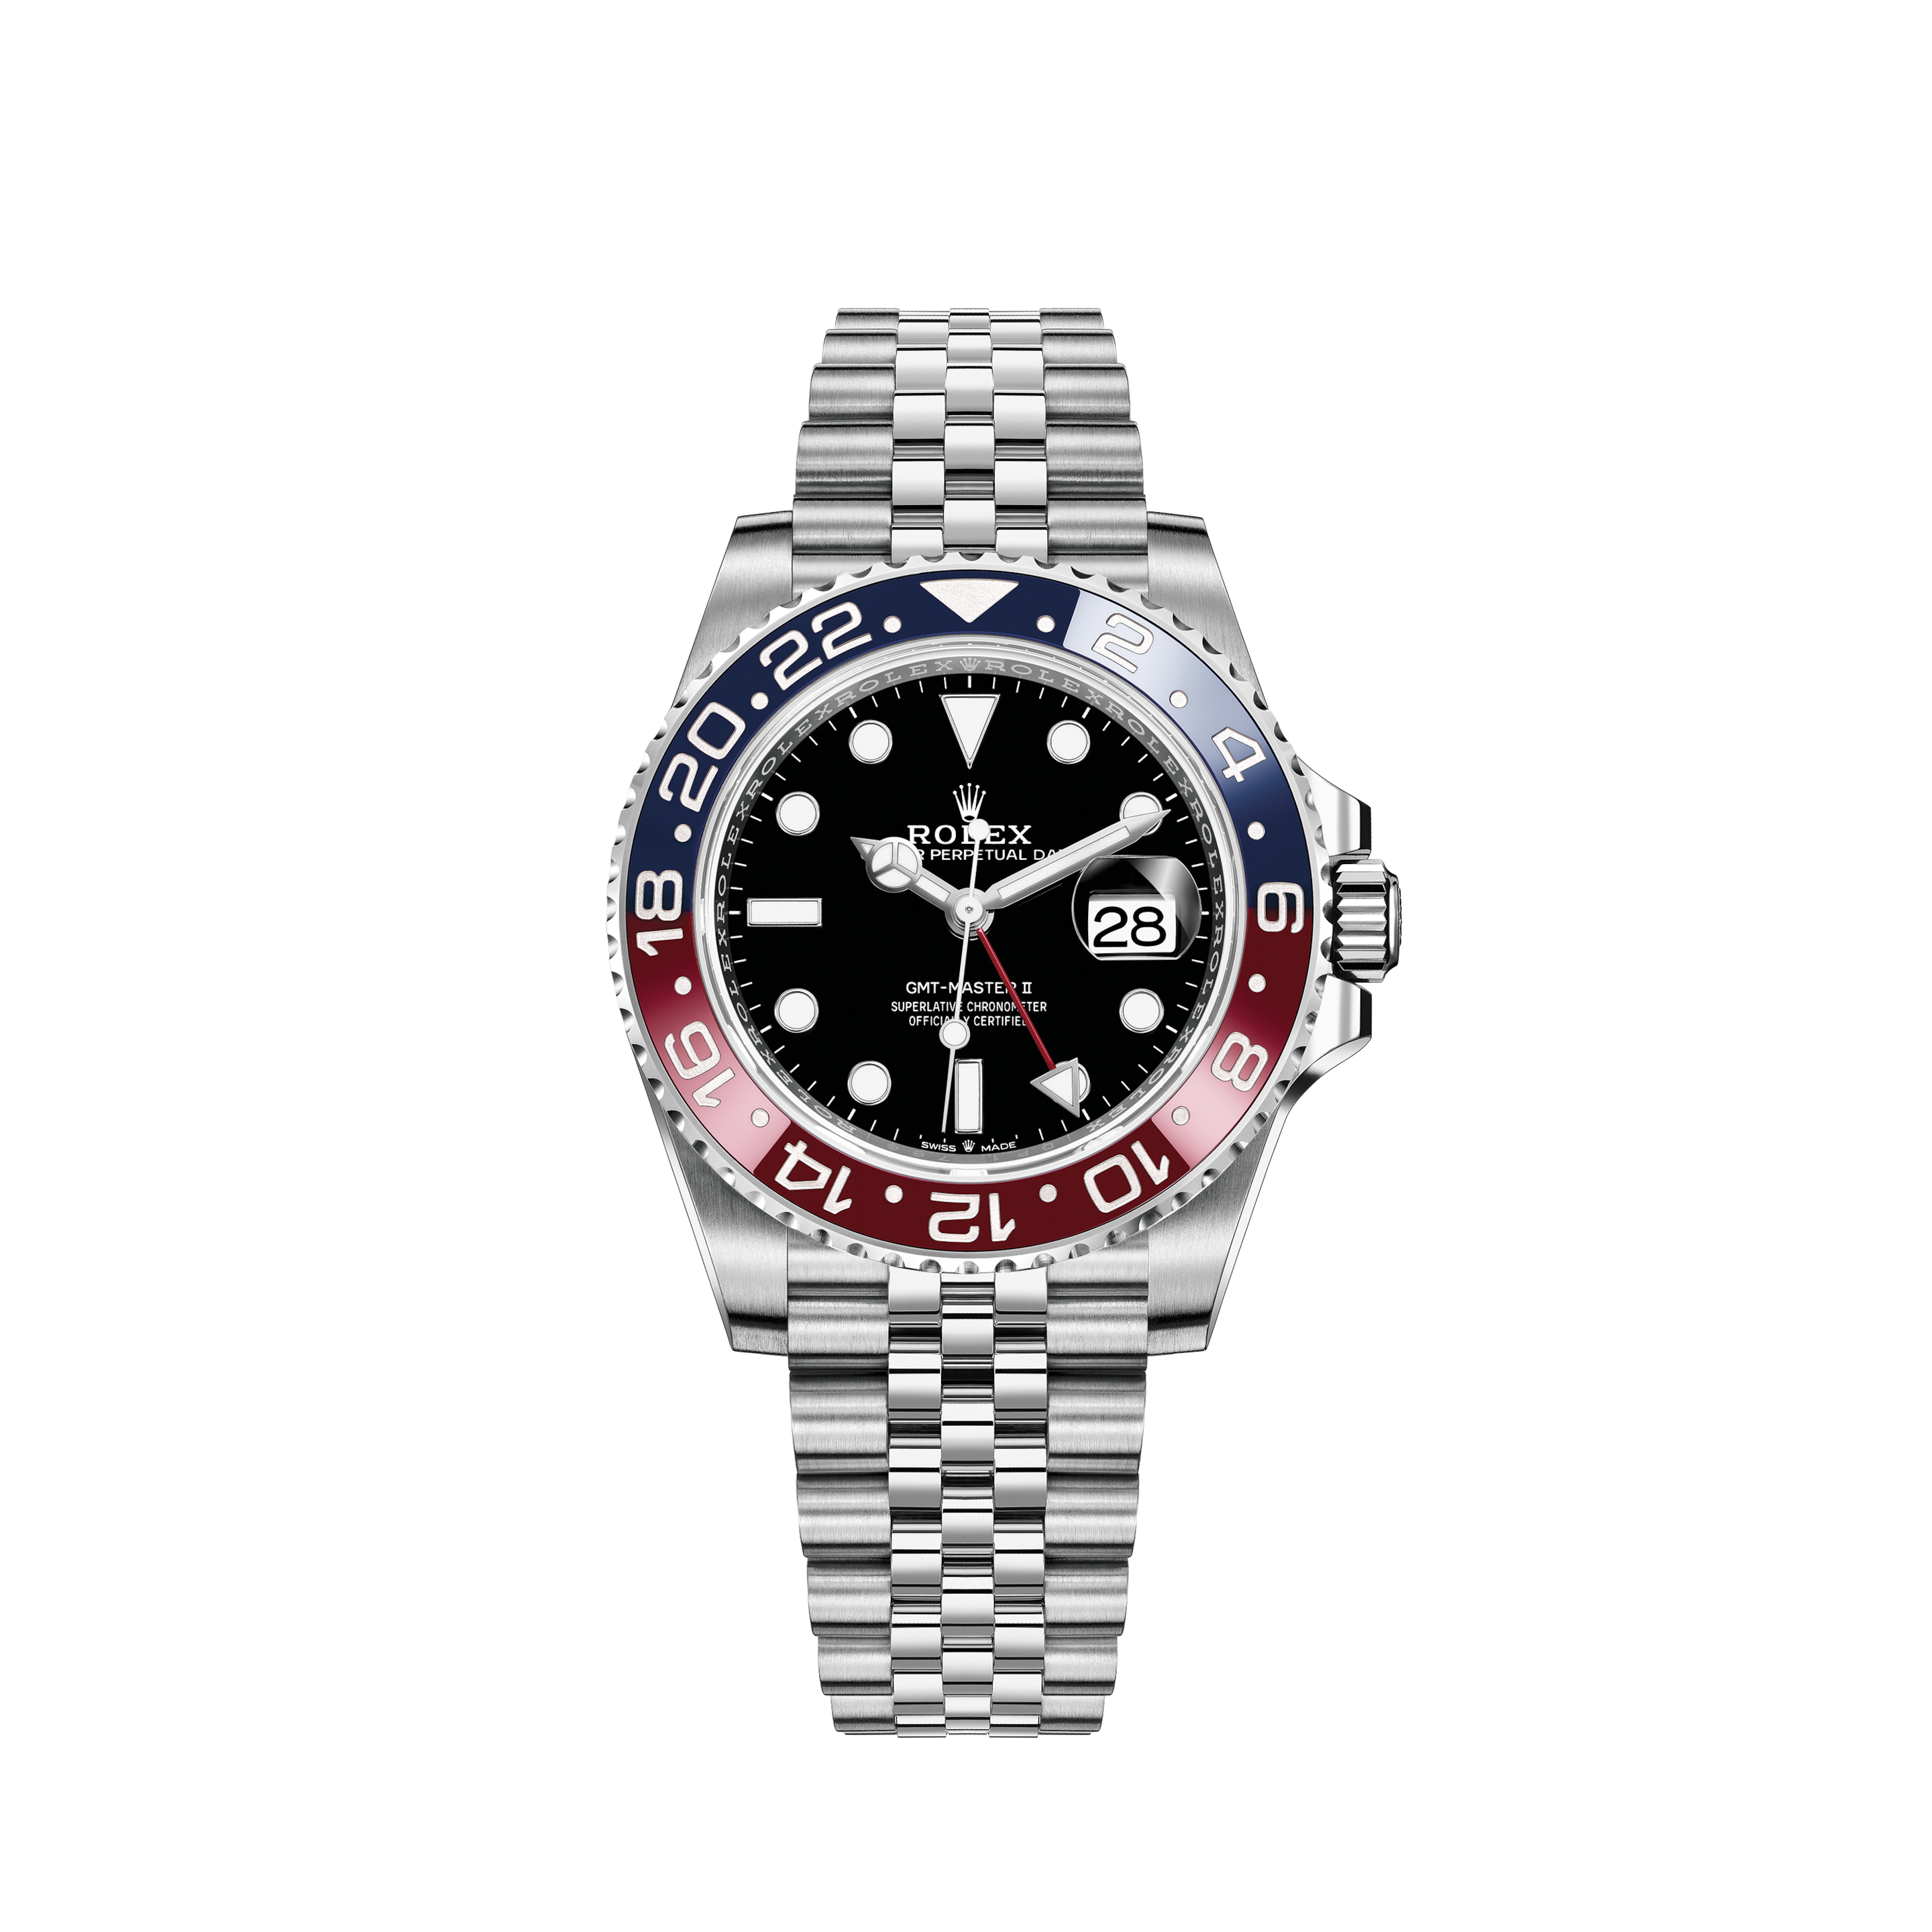 Rolex [204] Y June 2003 Parallel ROLEX Rolex Yachtmaster Loredium 169622 Grey Dial PT/SS Platinum/Stainless Automatic Date Display Women's Watch Watch